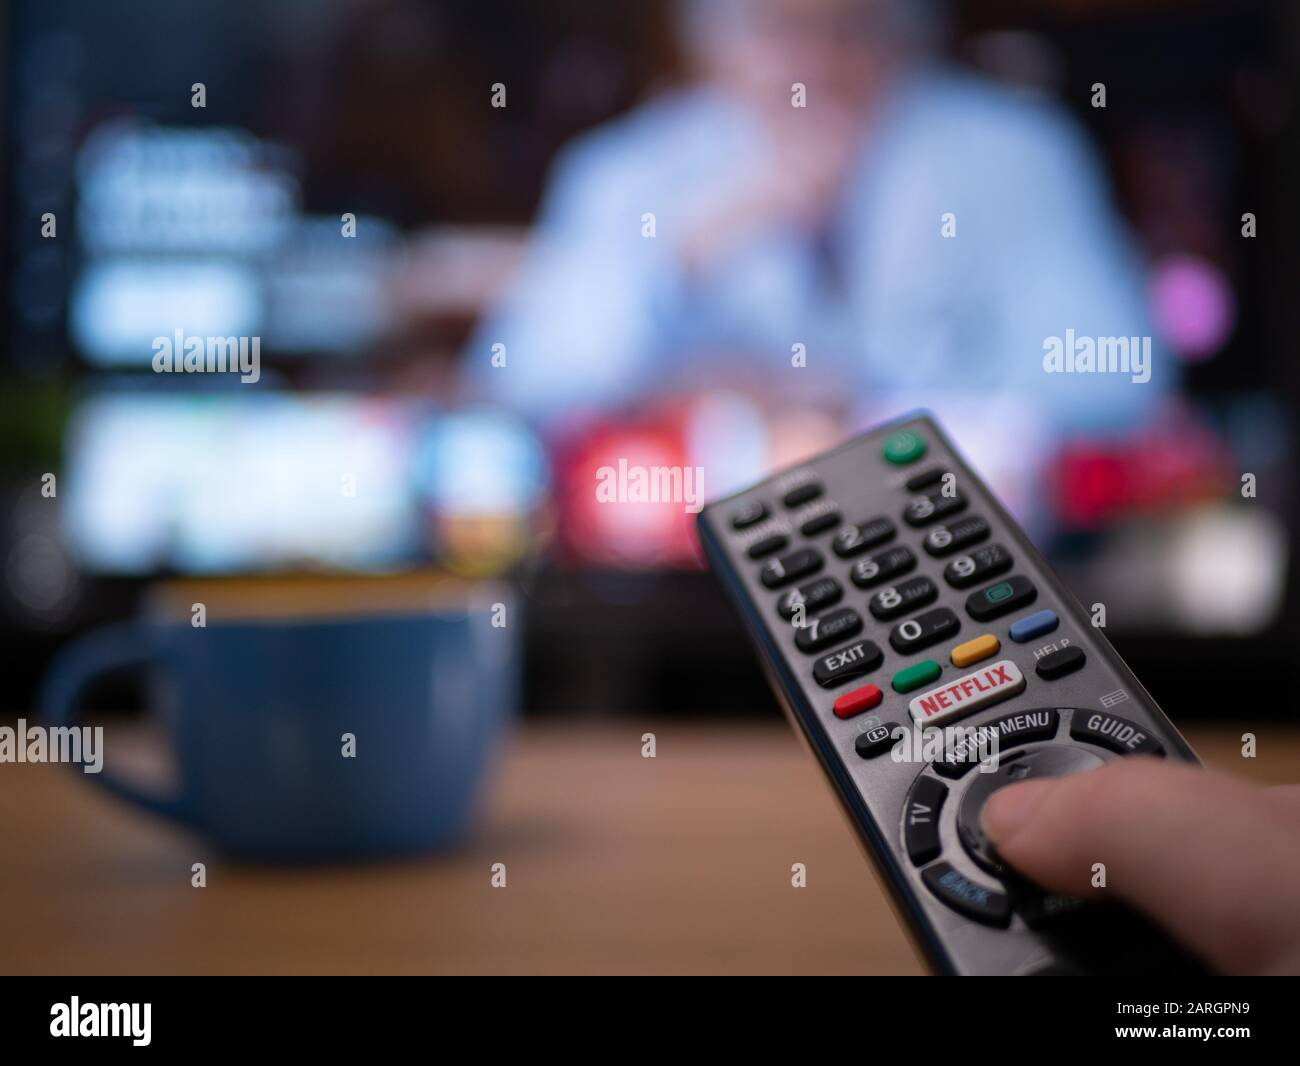 UK, Jan 2020: close up of TV remote with television behind showing Netflix menu documentary Stock Photo